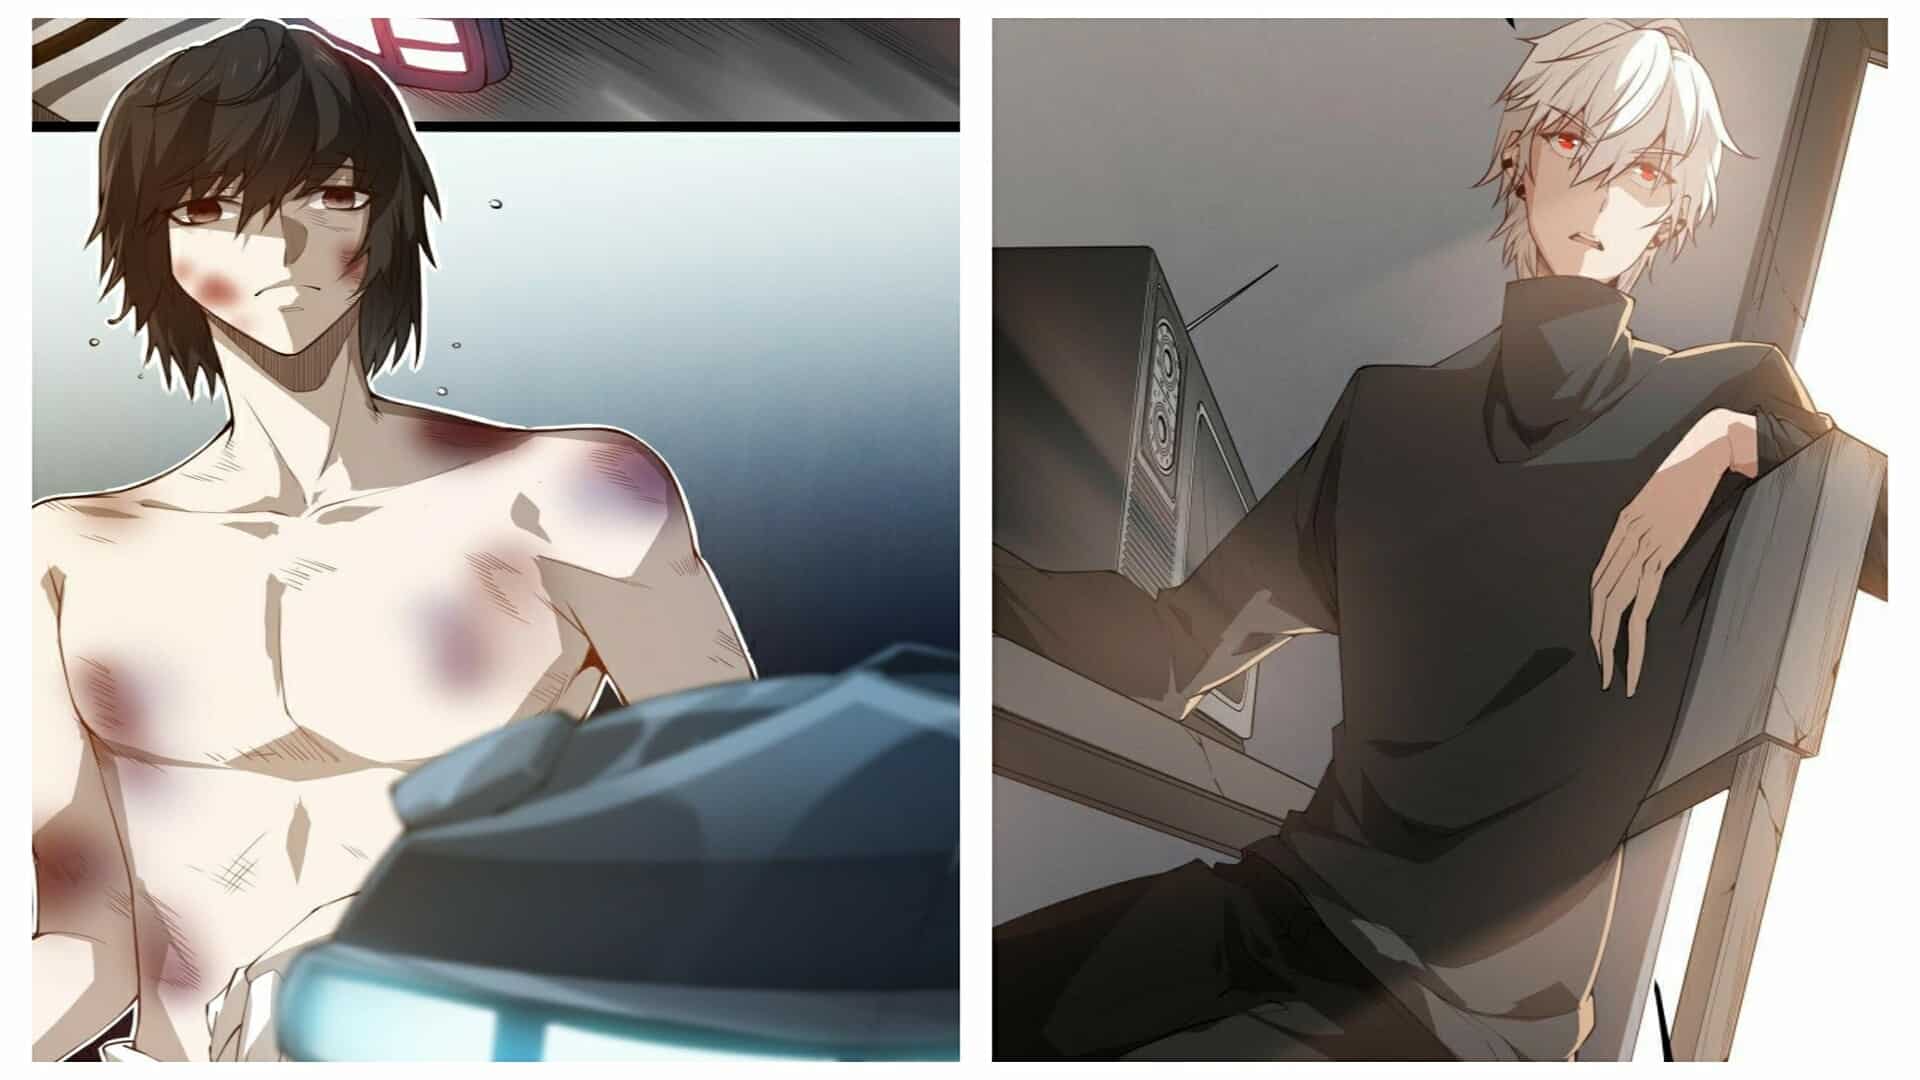 Ling Ce Before (Left) And After (Right) HIs Regression - The Price Of Breaking Up Chapter 1